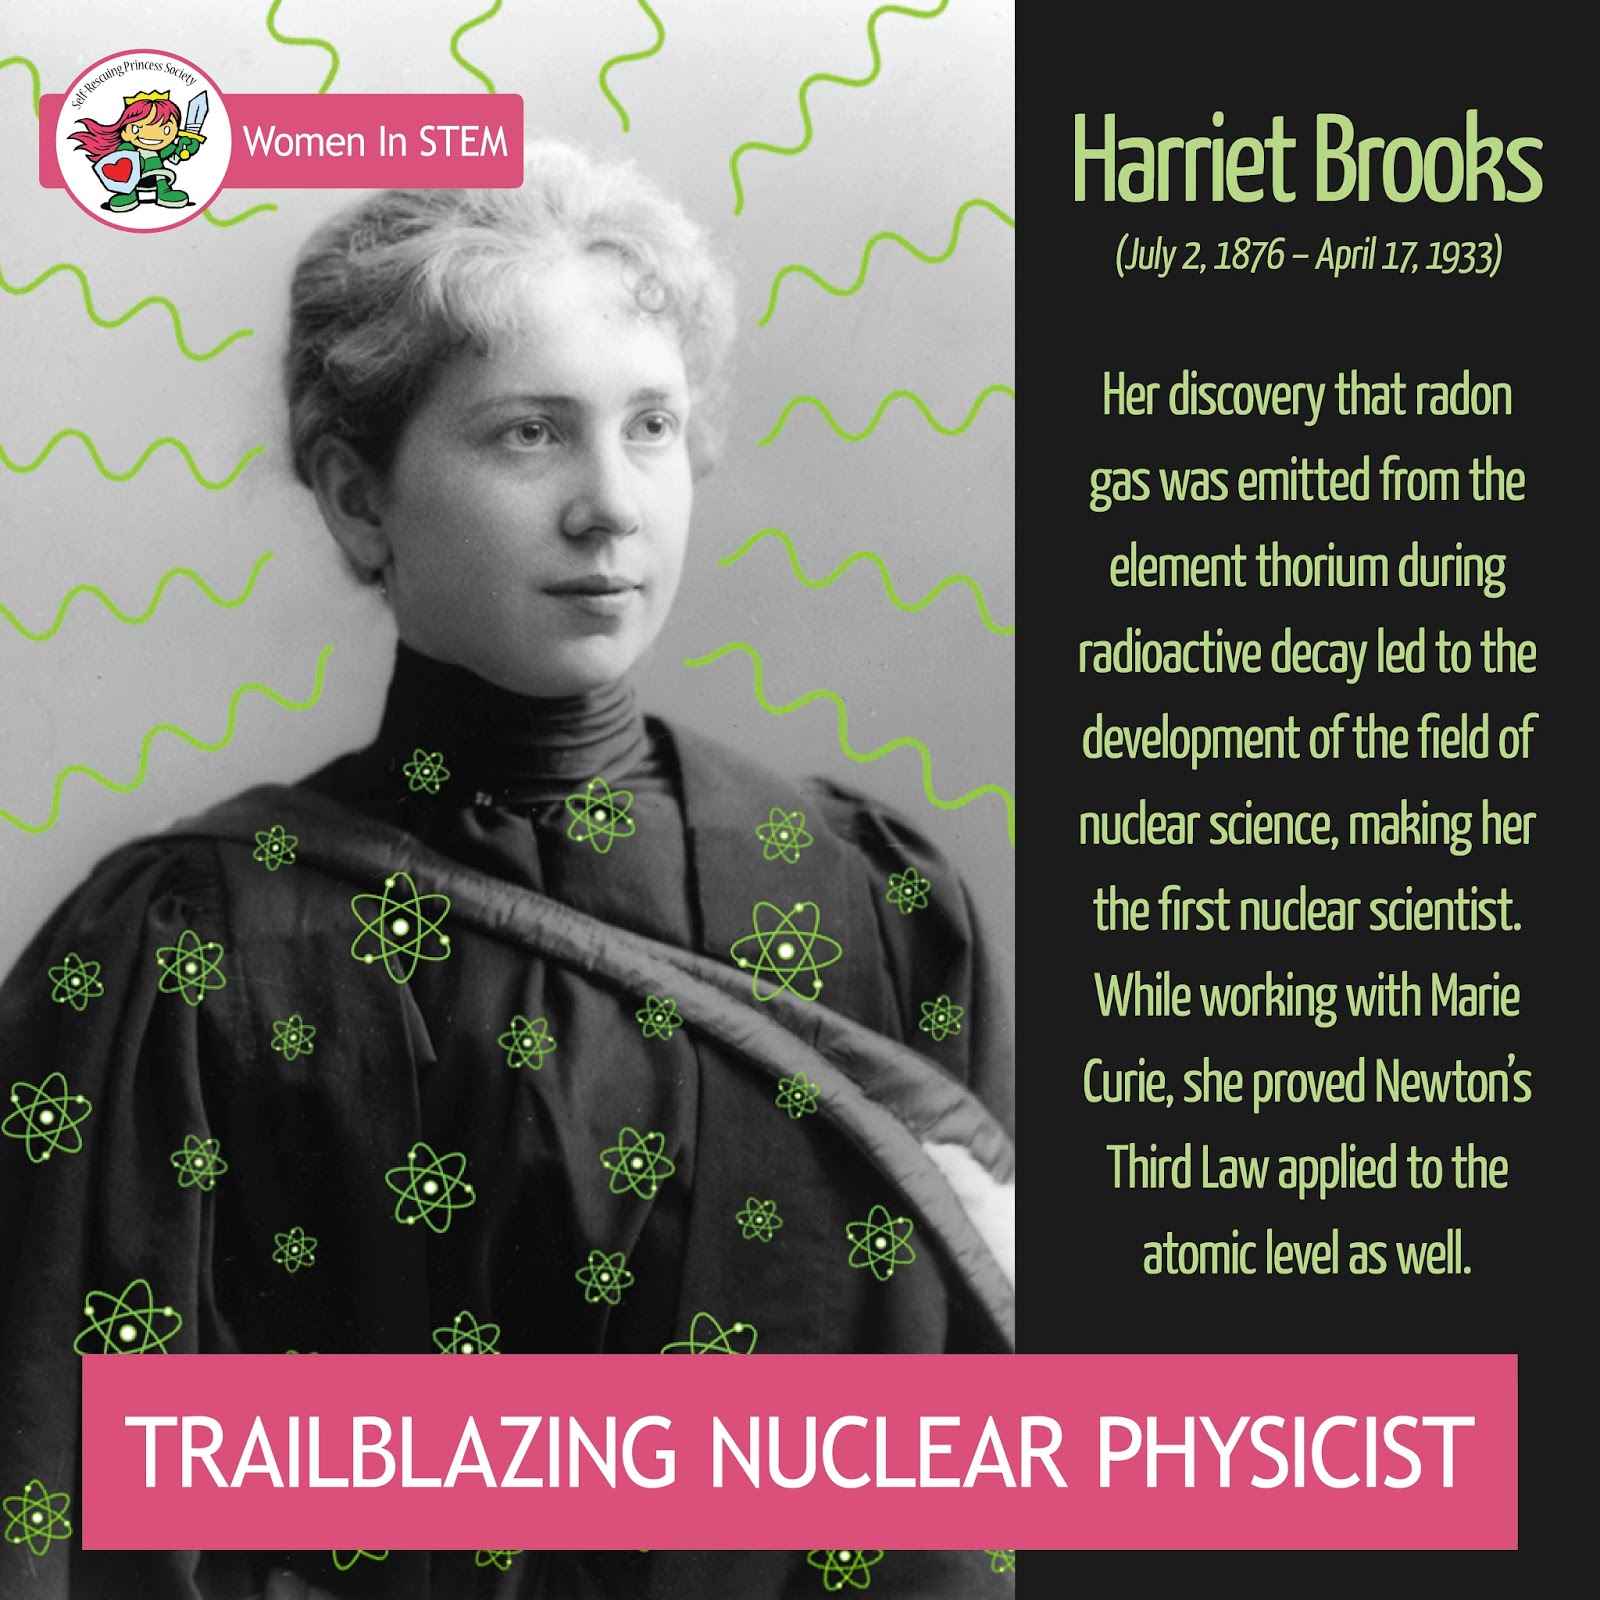 Self-Rescuing Princess Society: Harriet Brooks - Canada's first woman of nuclear science